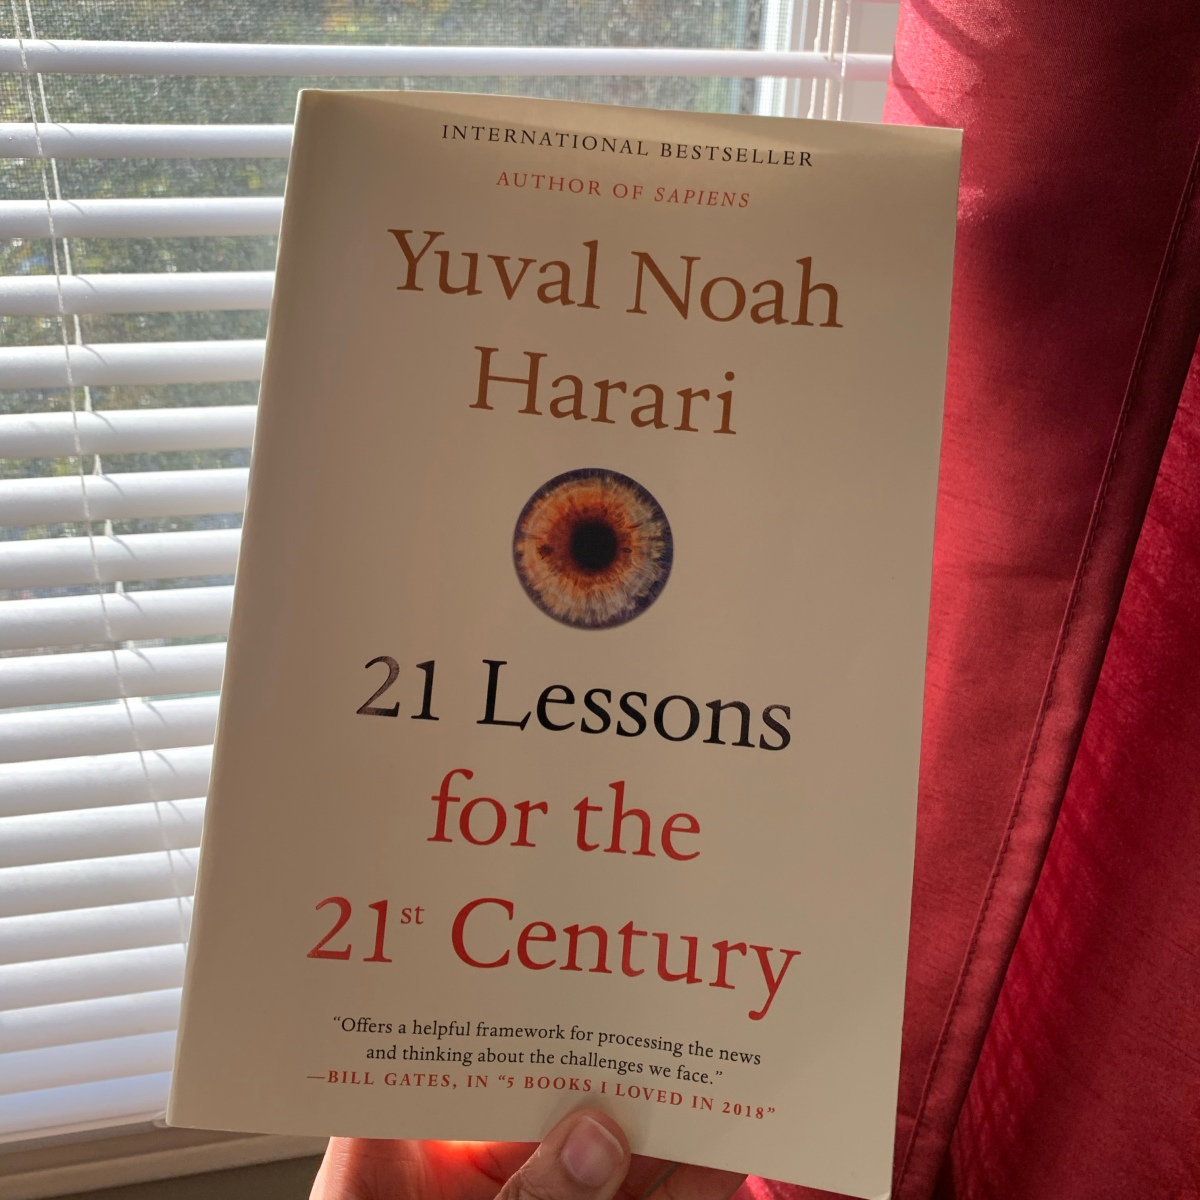 ’21 Lessons for the 21st Century’ by Yuval Noah Harari